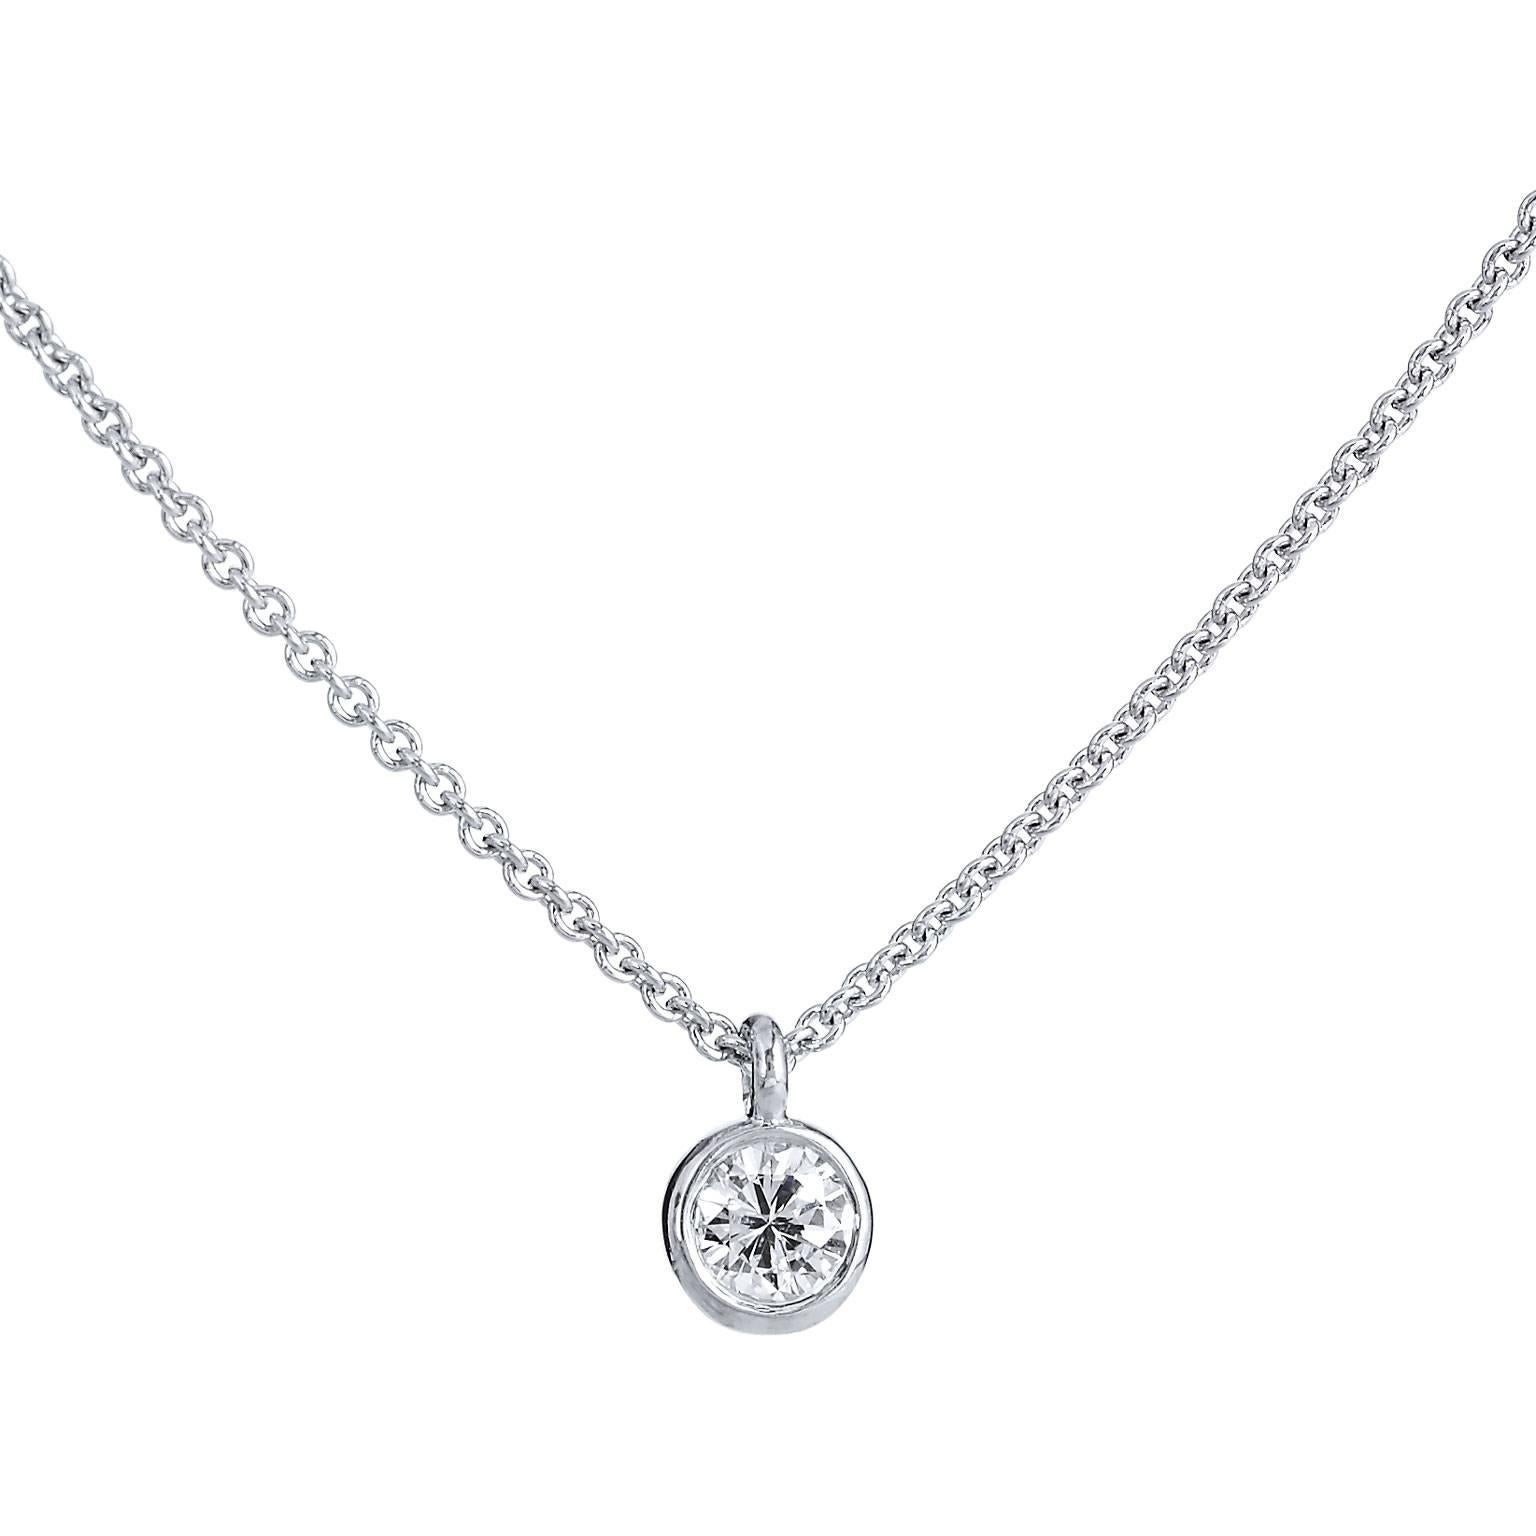 This H and H 18 karat white gold pendant features a lovely 0.11 carat round brilliant cut diamond at center bezel set (G/SI1). Simplicity and refinement reign supreme in this piece.